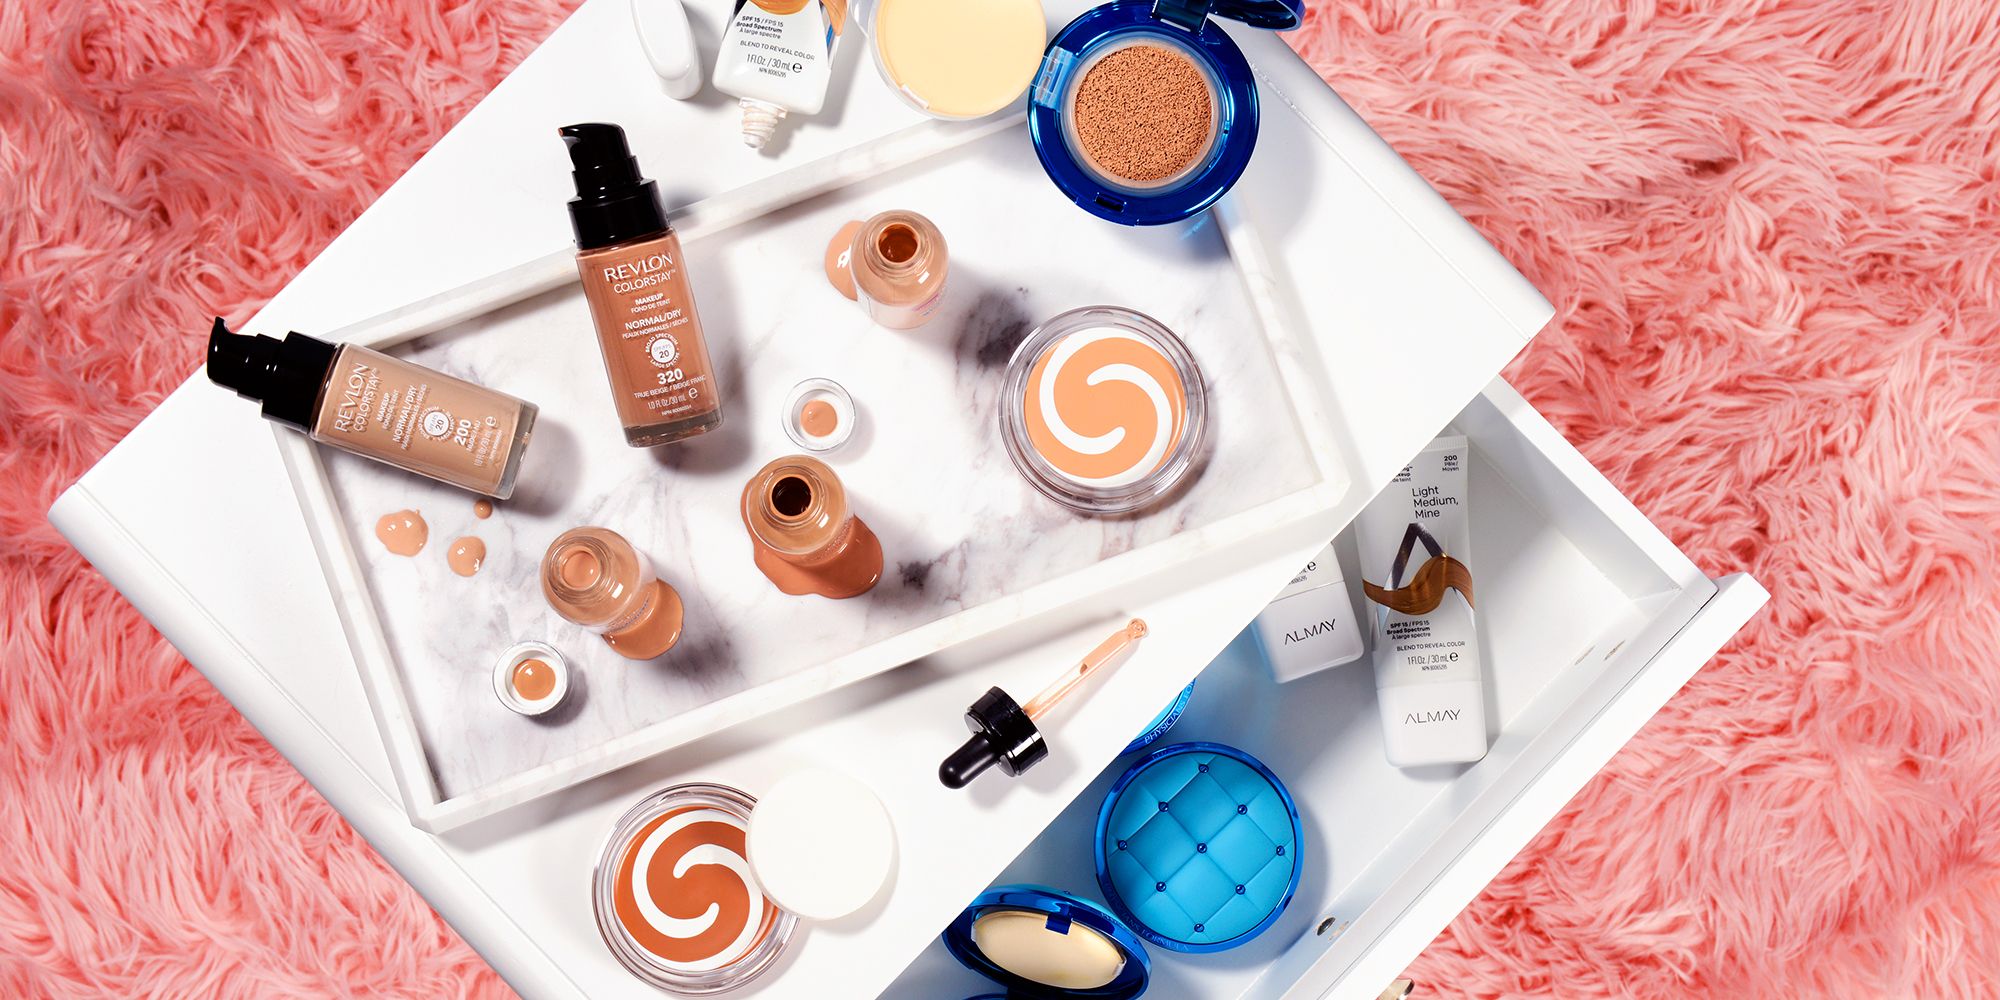 10 Best Drugstore Foundations of 2019 - Cheap Foundations Under $15